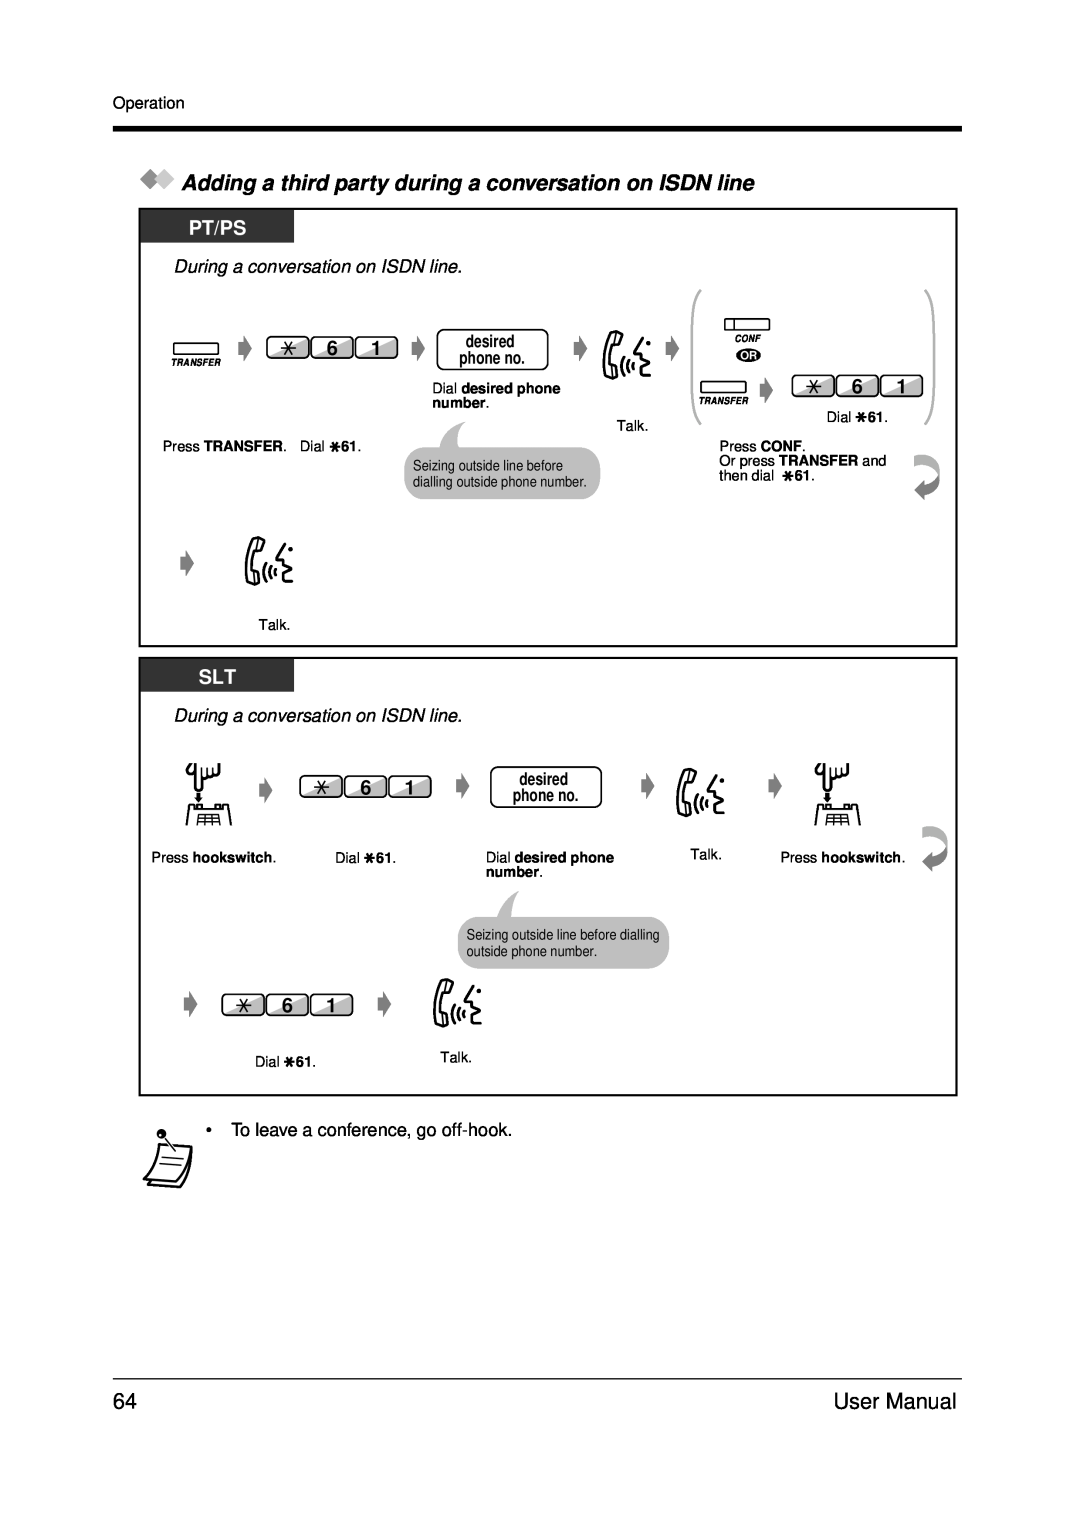 Panasonic KX-TDA200 user manual Pt/Ps, During a conversation on ISDN line, Dial desired phone, number, Press hookswitch 